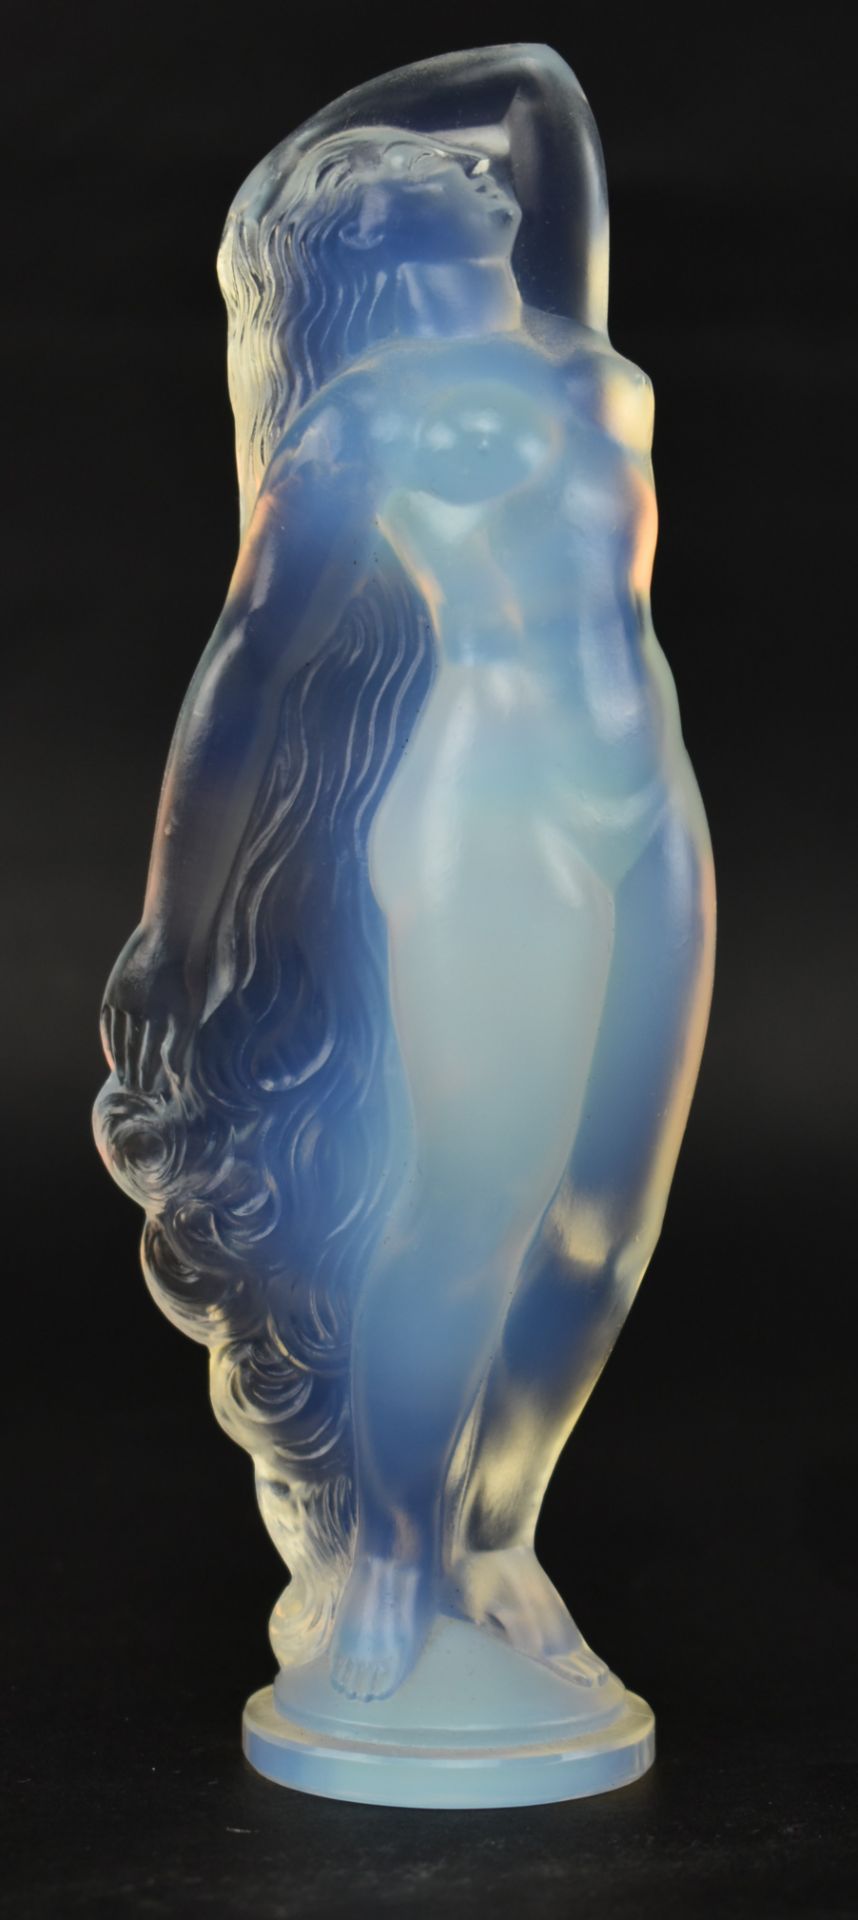 EARLY 20TH CENTURY ART DECO LALIQUE STYLE GLASS FEMALE NUDE